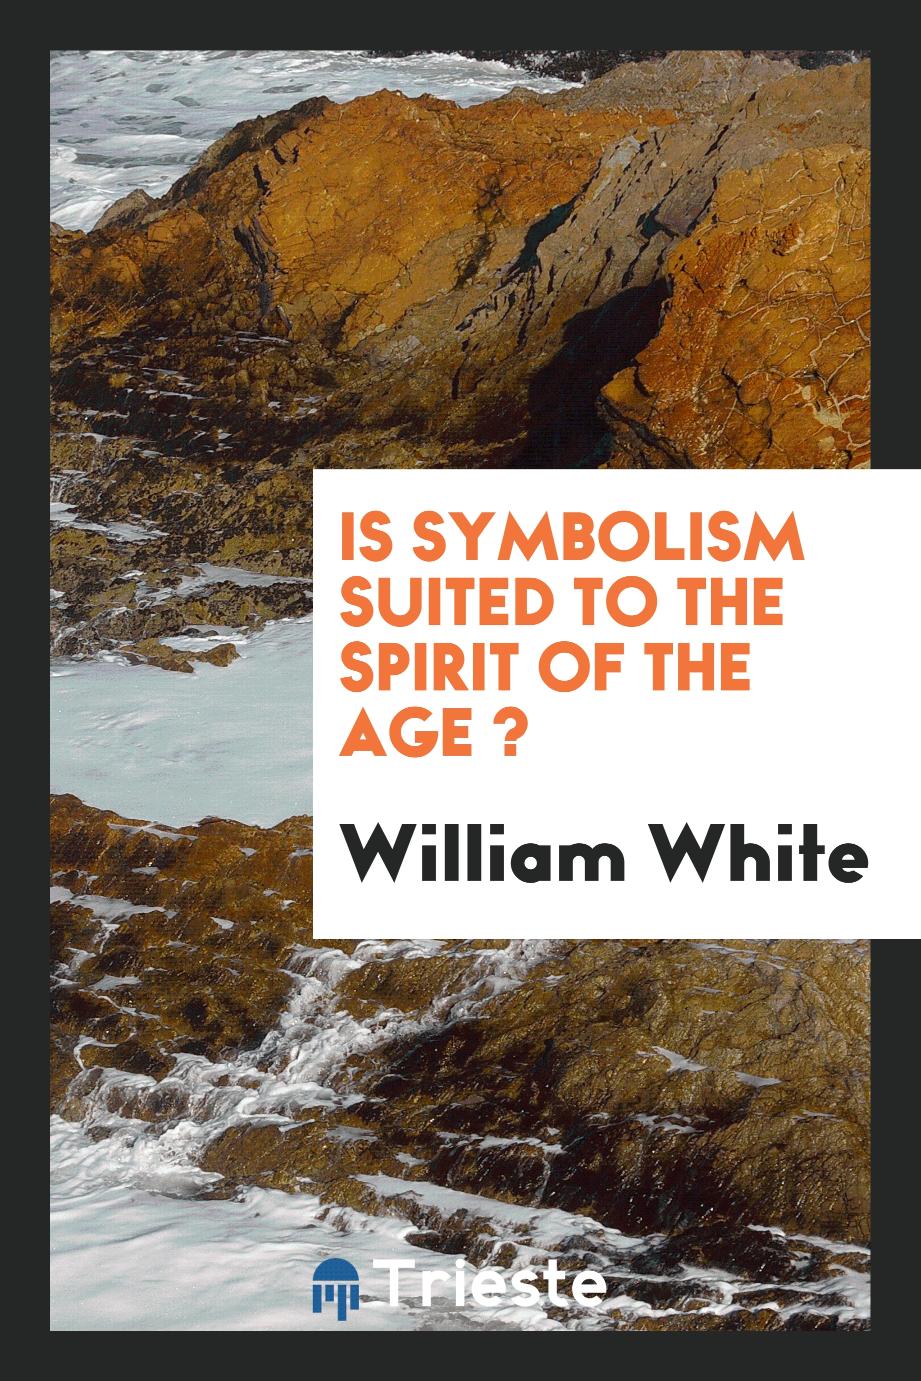 Is symbolism suited to the spirit of the age ?